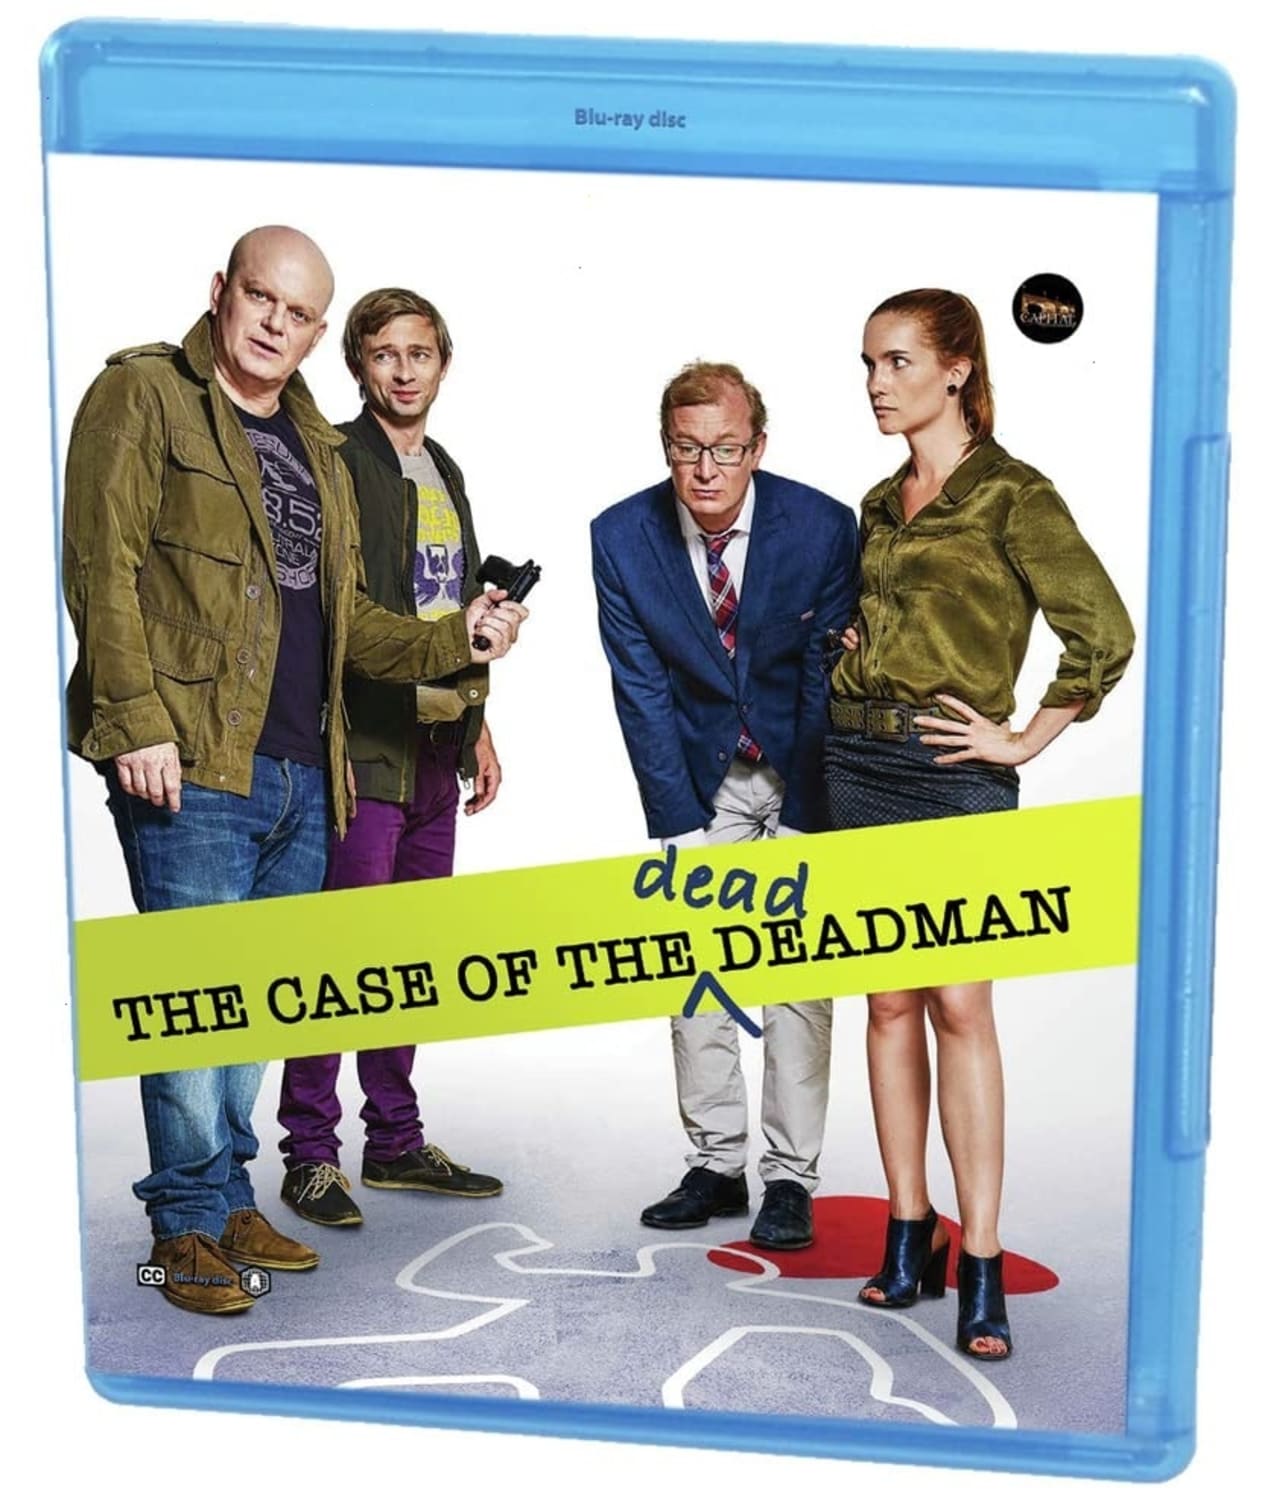 The Case of the Dead Deadman (Blu-ray) on MovieShack